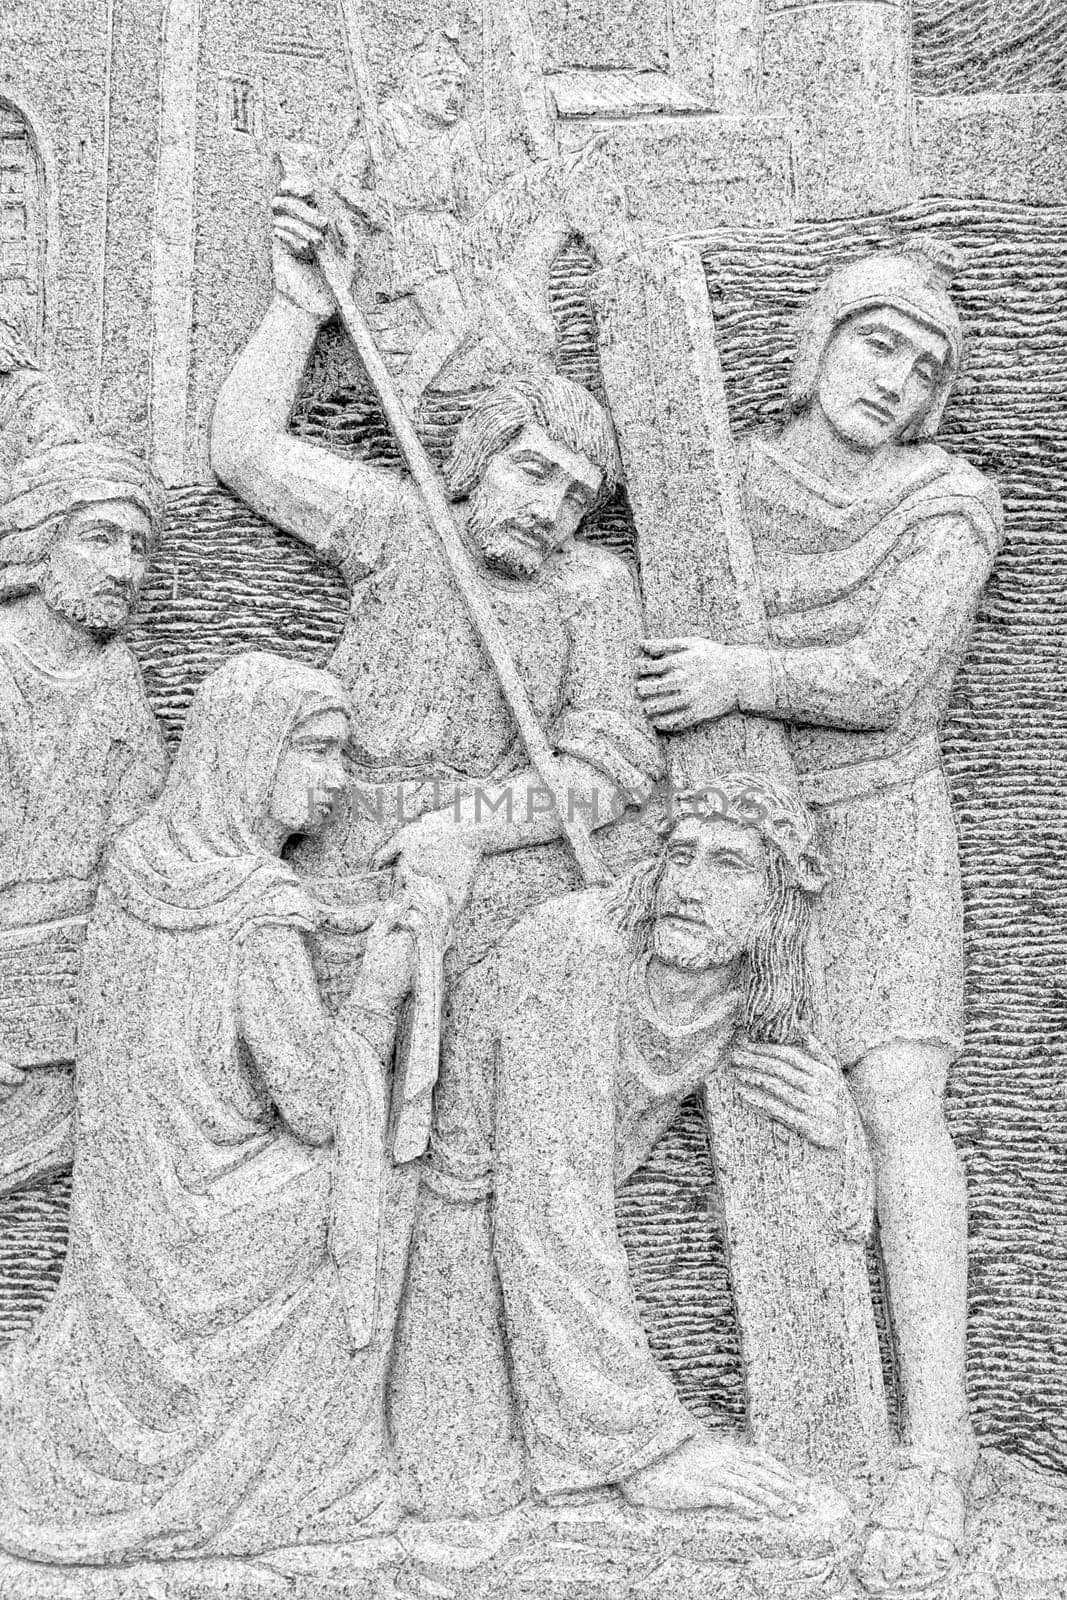 Bas-relief of Jesus restrained, captured and guided by the guard.